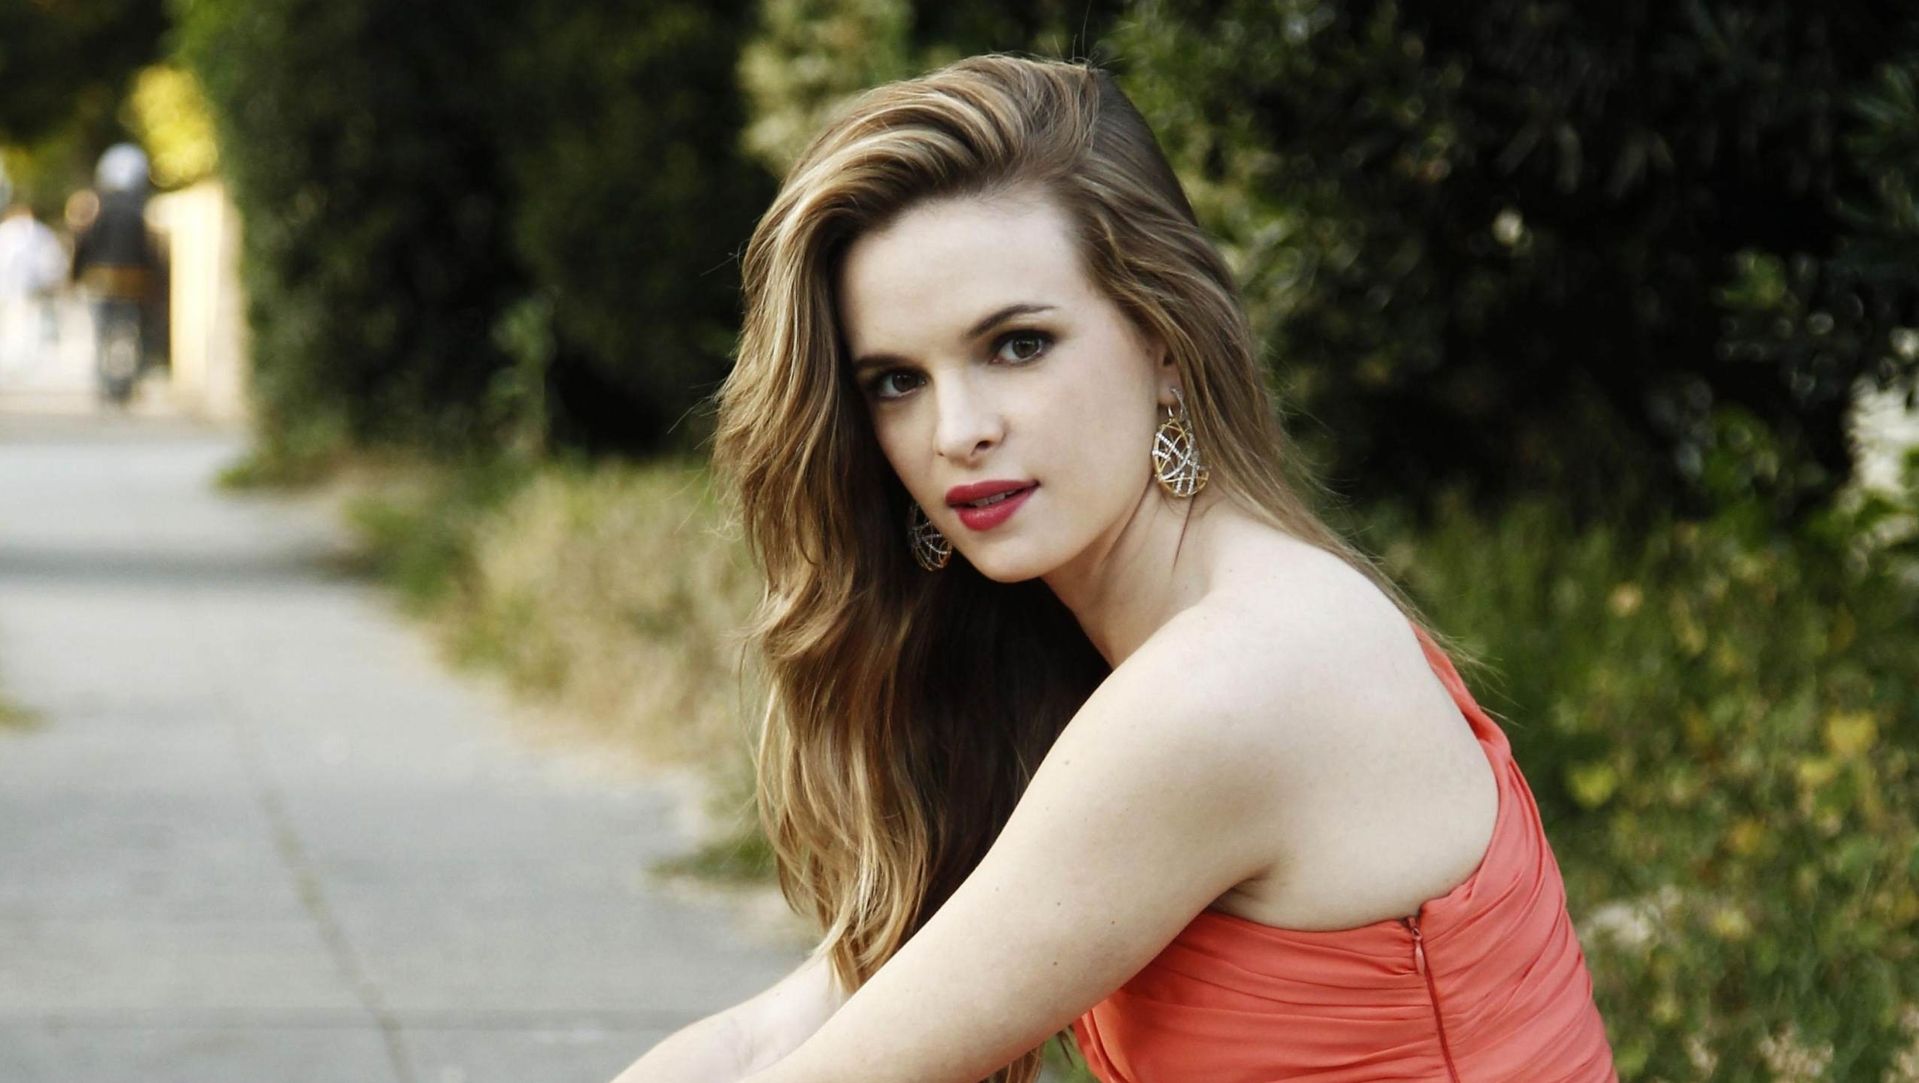 Newest Mobile Wallpaper Danielle Panabaker